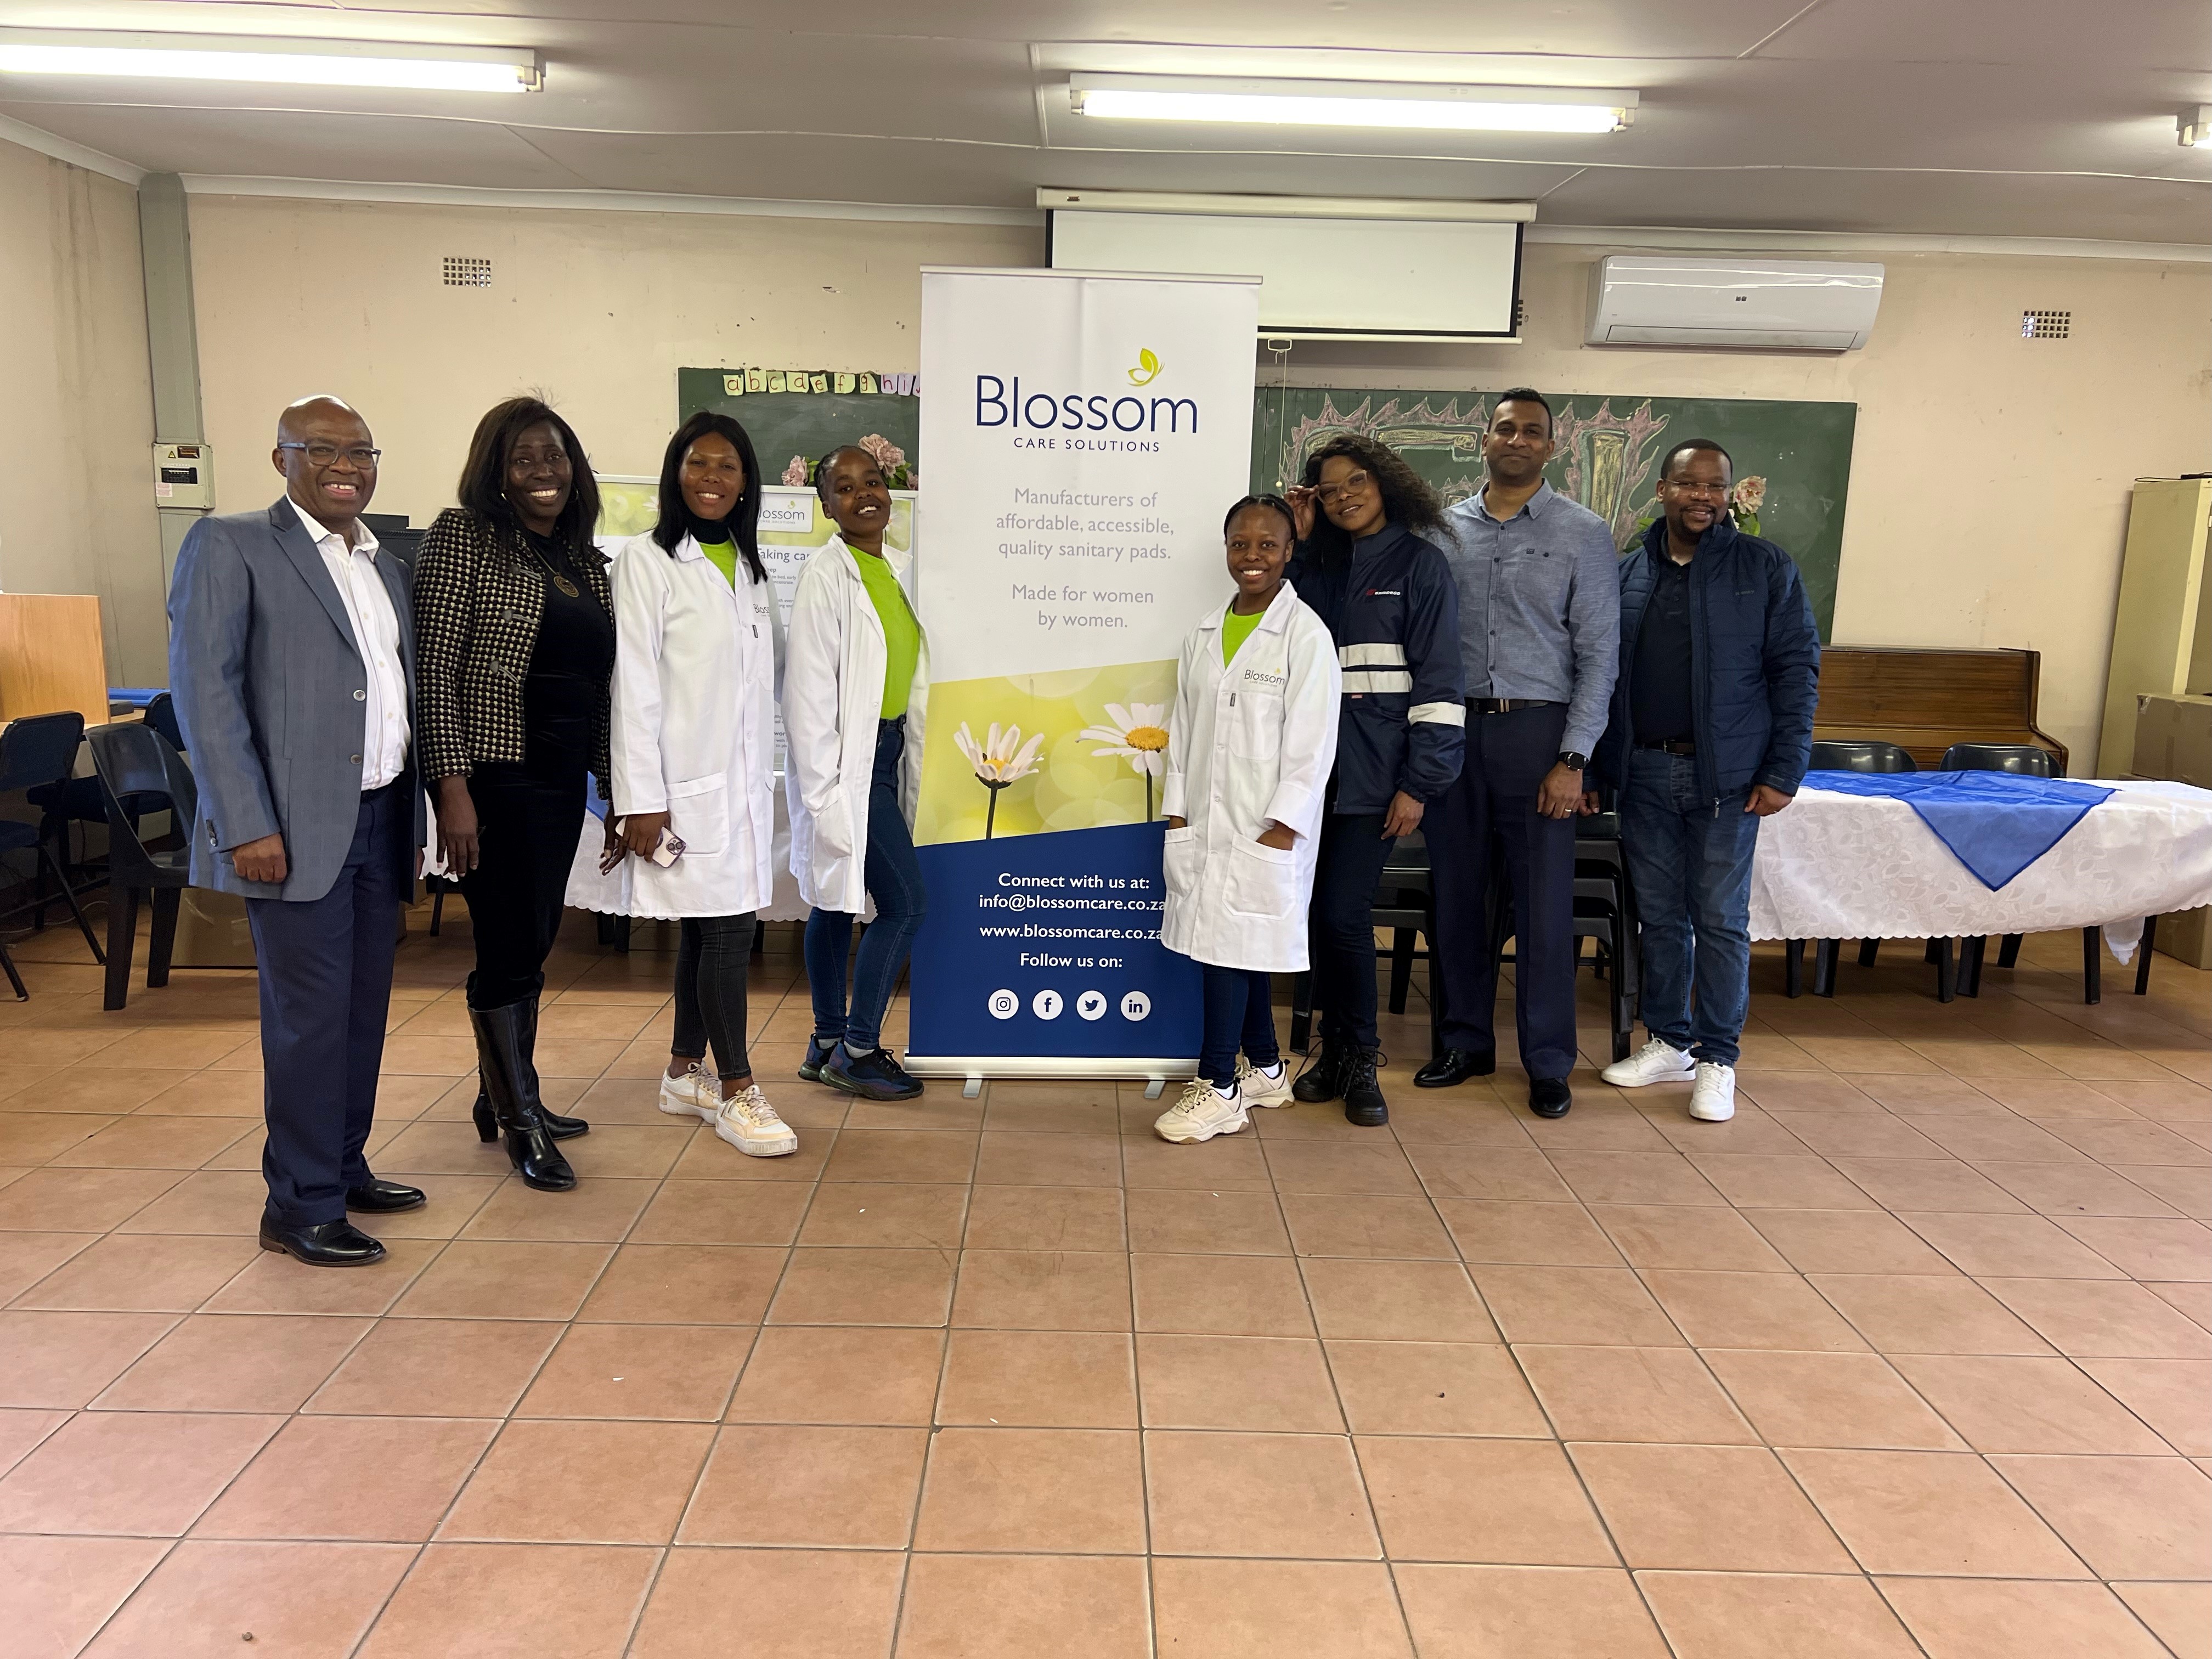 Grindrod partnered with Blossom Care Solutions